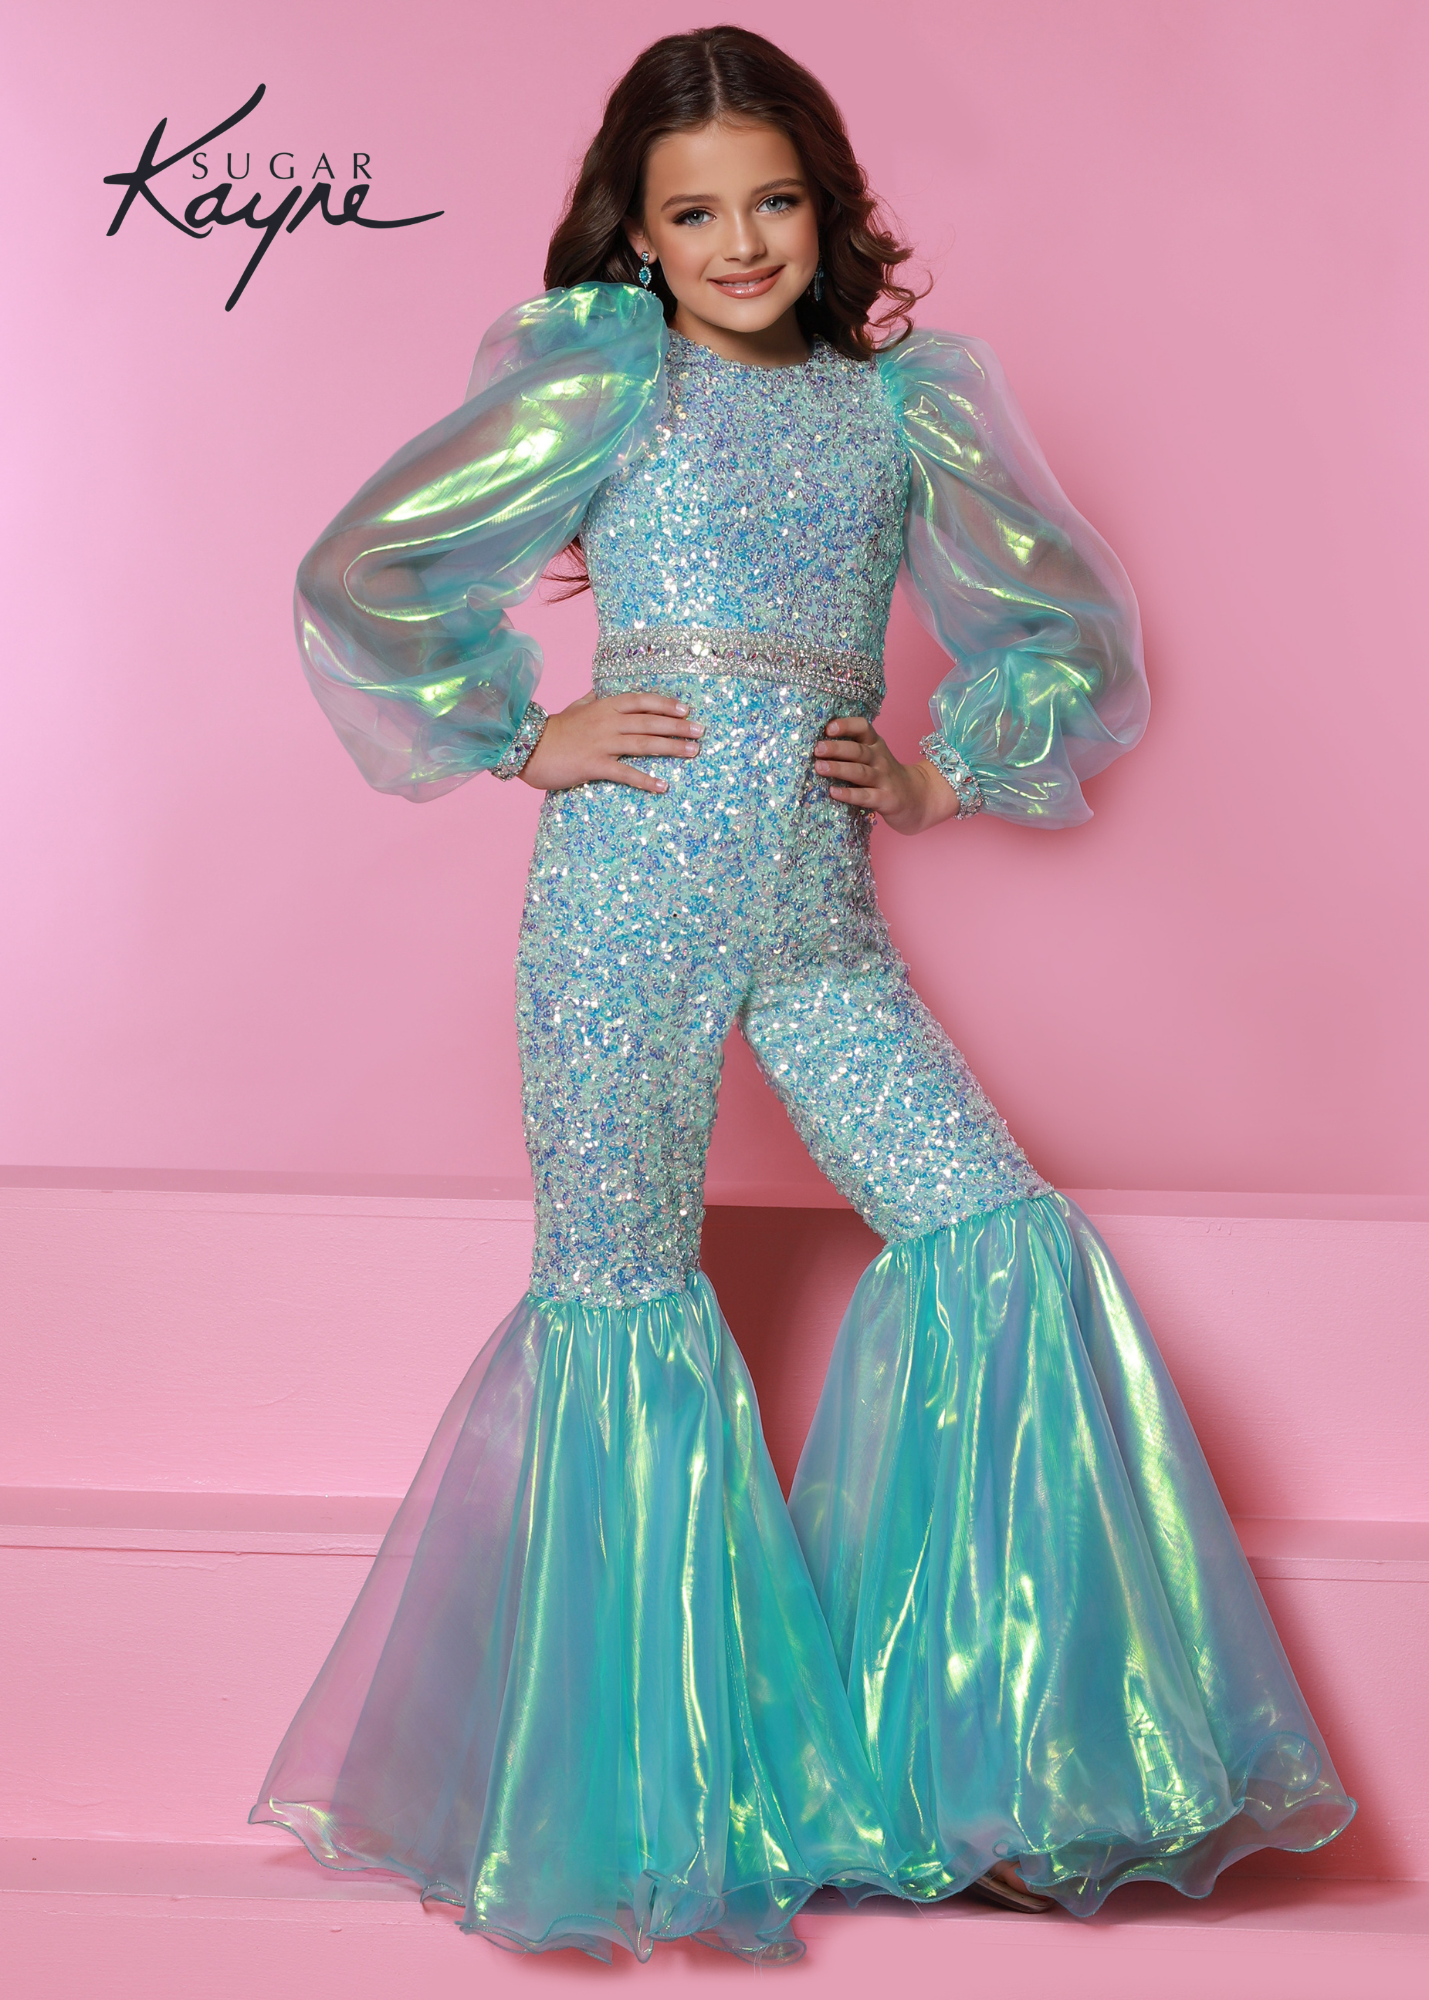 Sugar Kayne C307 Girls Sequin Jumpsuit Bell Bottom Long Sleeve Pageant Fun Fashion Shimmer Product Details Bring back the 70's with this fun fashion bell bottom jumpsuit. The sequin mesh adds the right amount of sparkle to make you glisten on the stage. The look is completed with the iridescent organza puff sleeves.  Colors: Aqua, Pink, White  Sizes: 2, 4, 6, 8, 10, 12, 14, 16  Fabric Sequin Mesh, Stretch Lining, Iridescent Organza